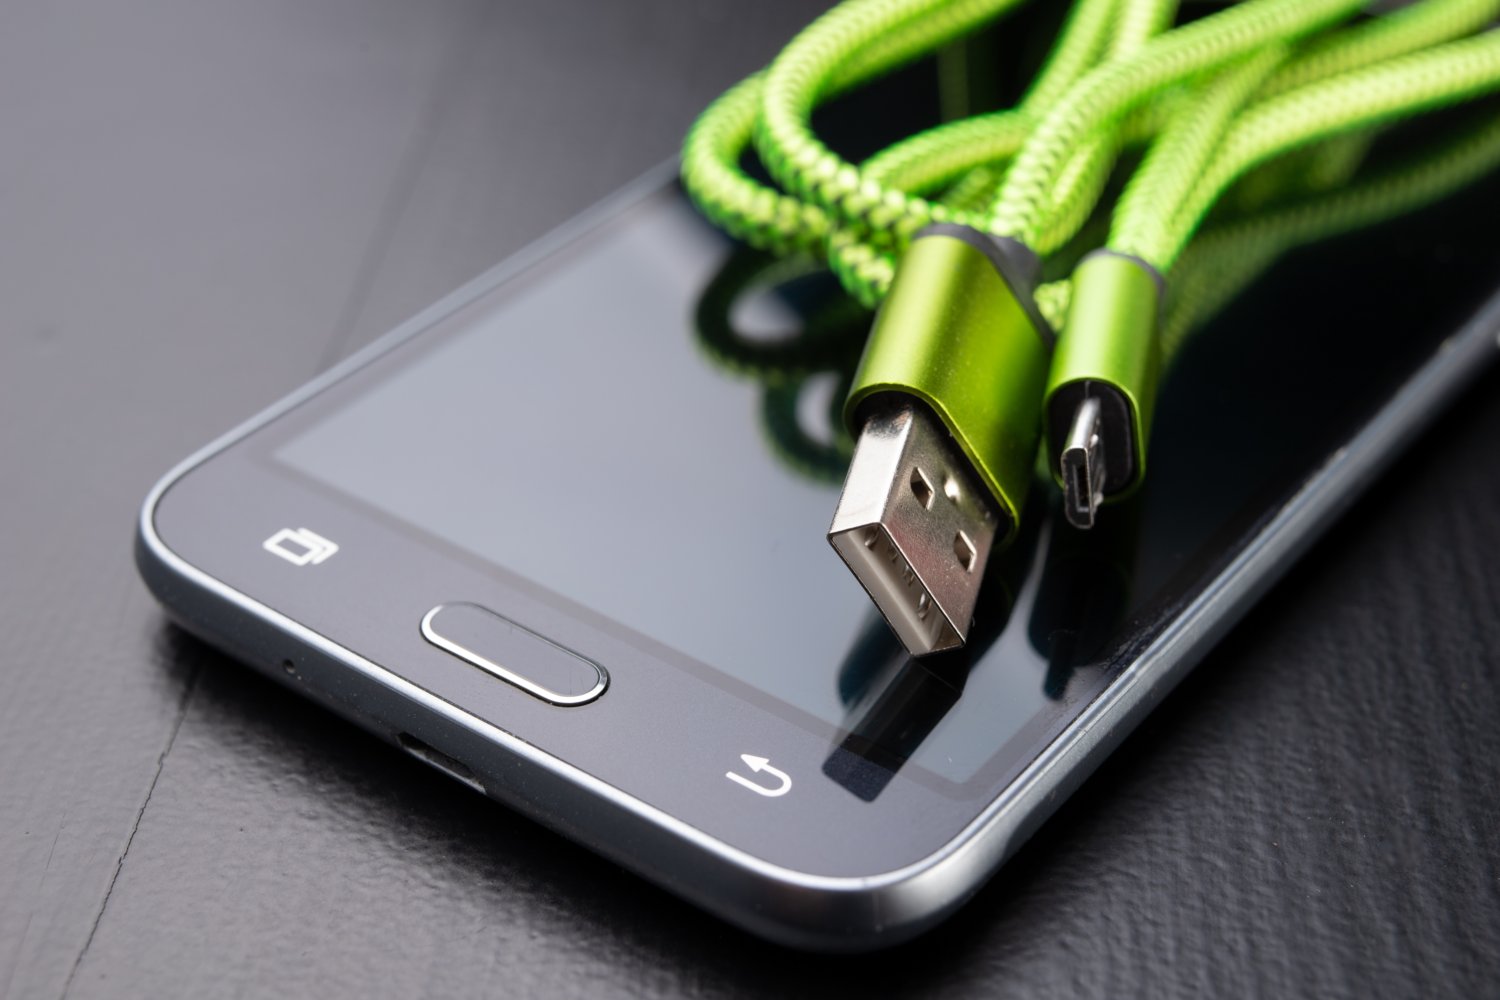 A usb cable for data transfer and phone charging. Telephone and accessories on the table. Dark background.